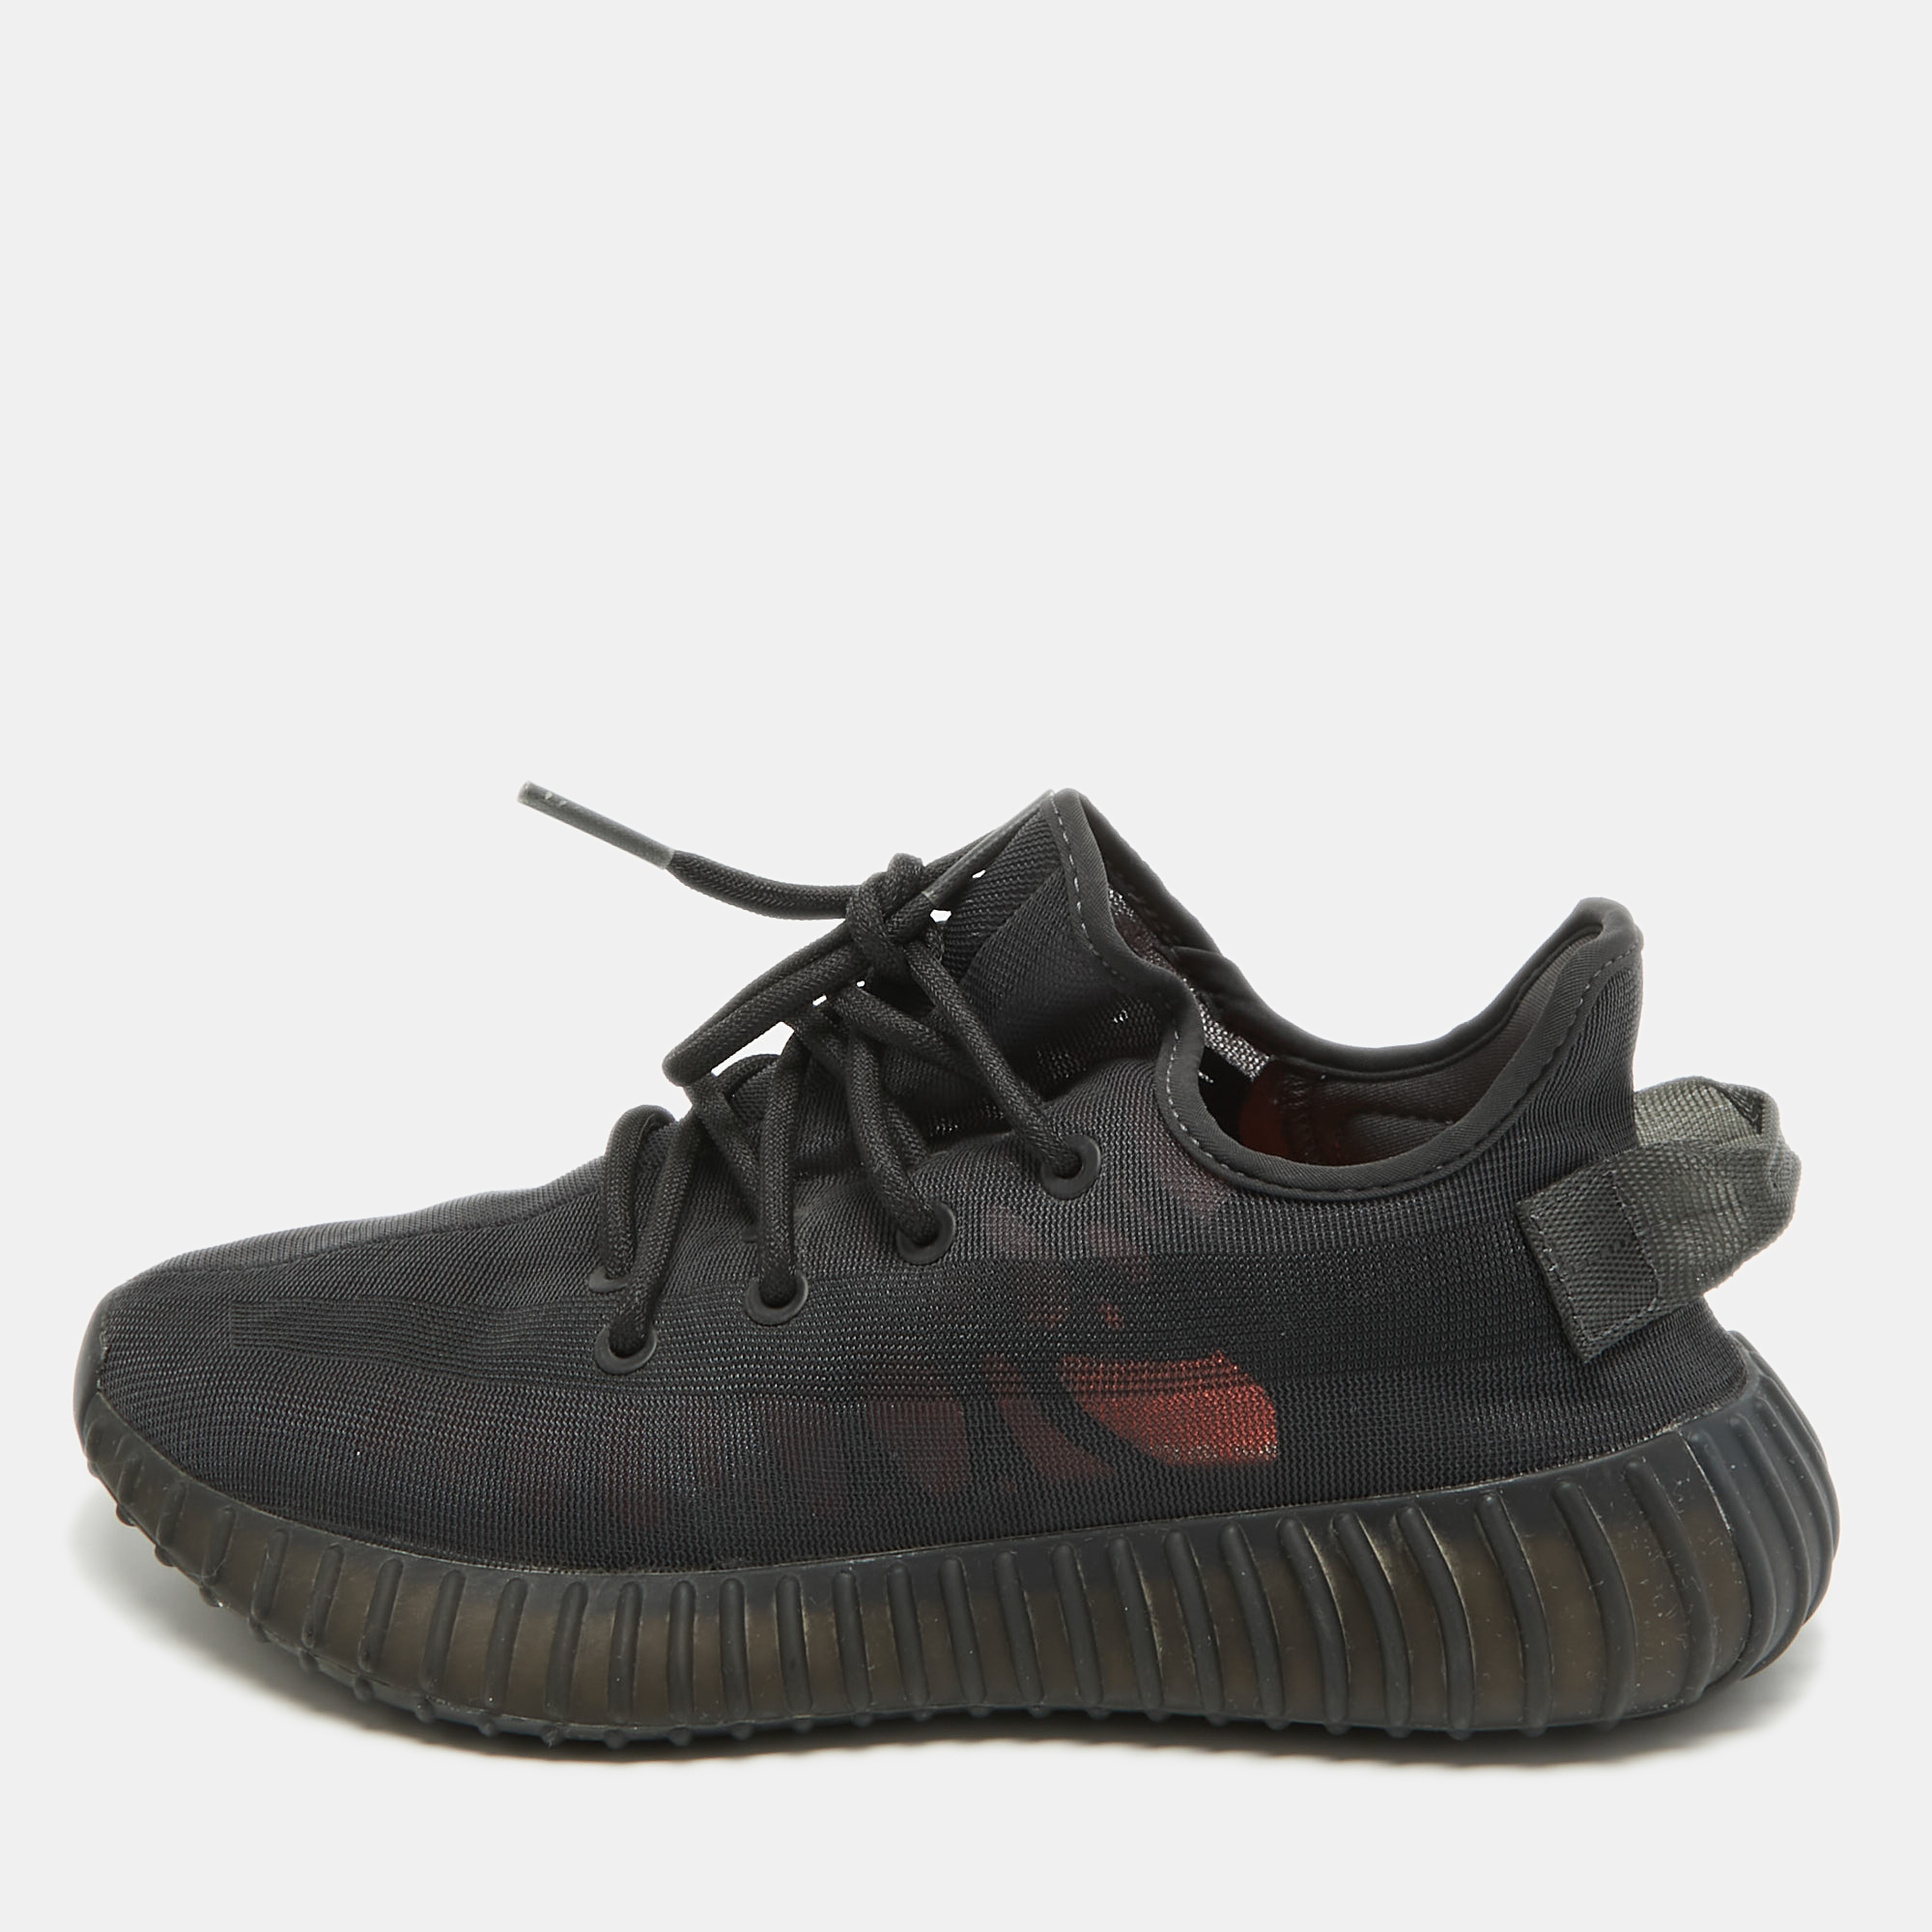 Pre-owned Yeezy X Adidas Black Mesh Boost 350 V2 Cinder Trainers Size 38 1/3